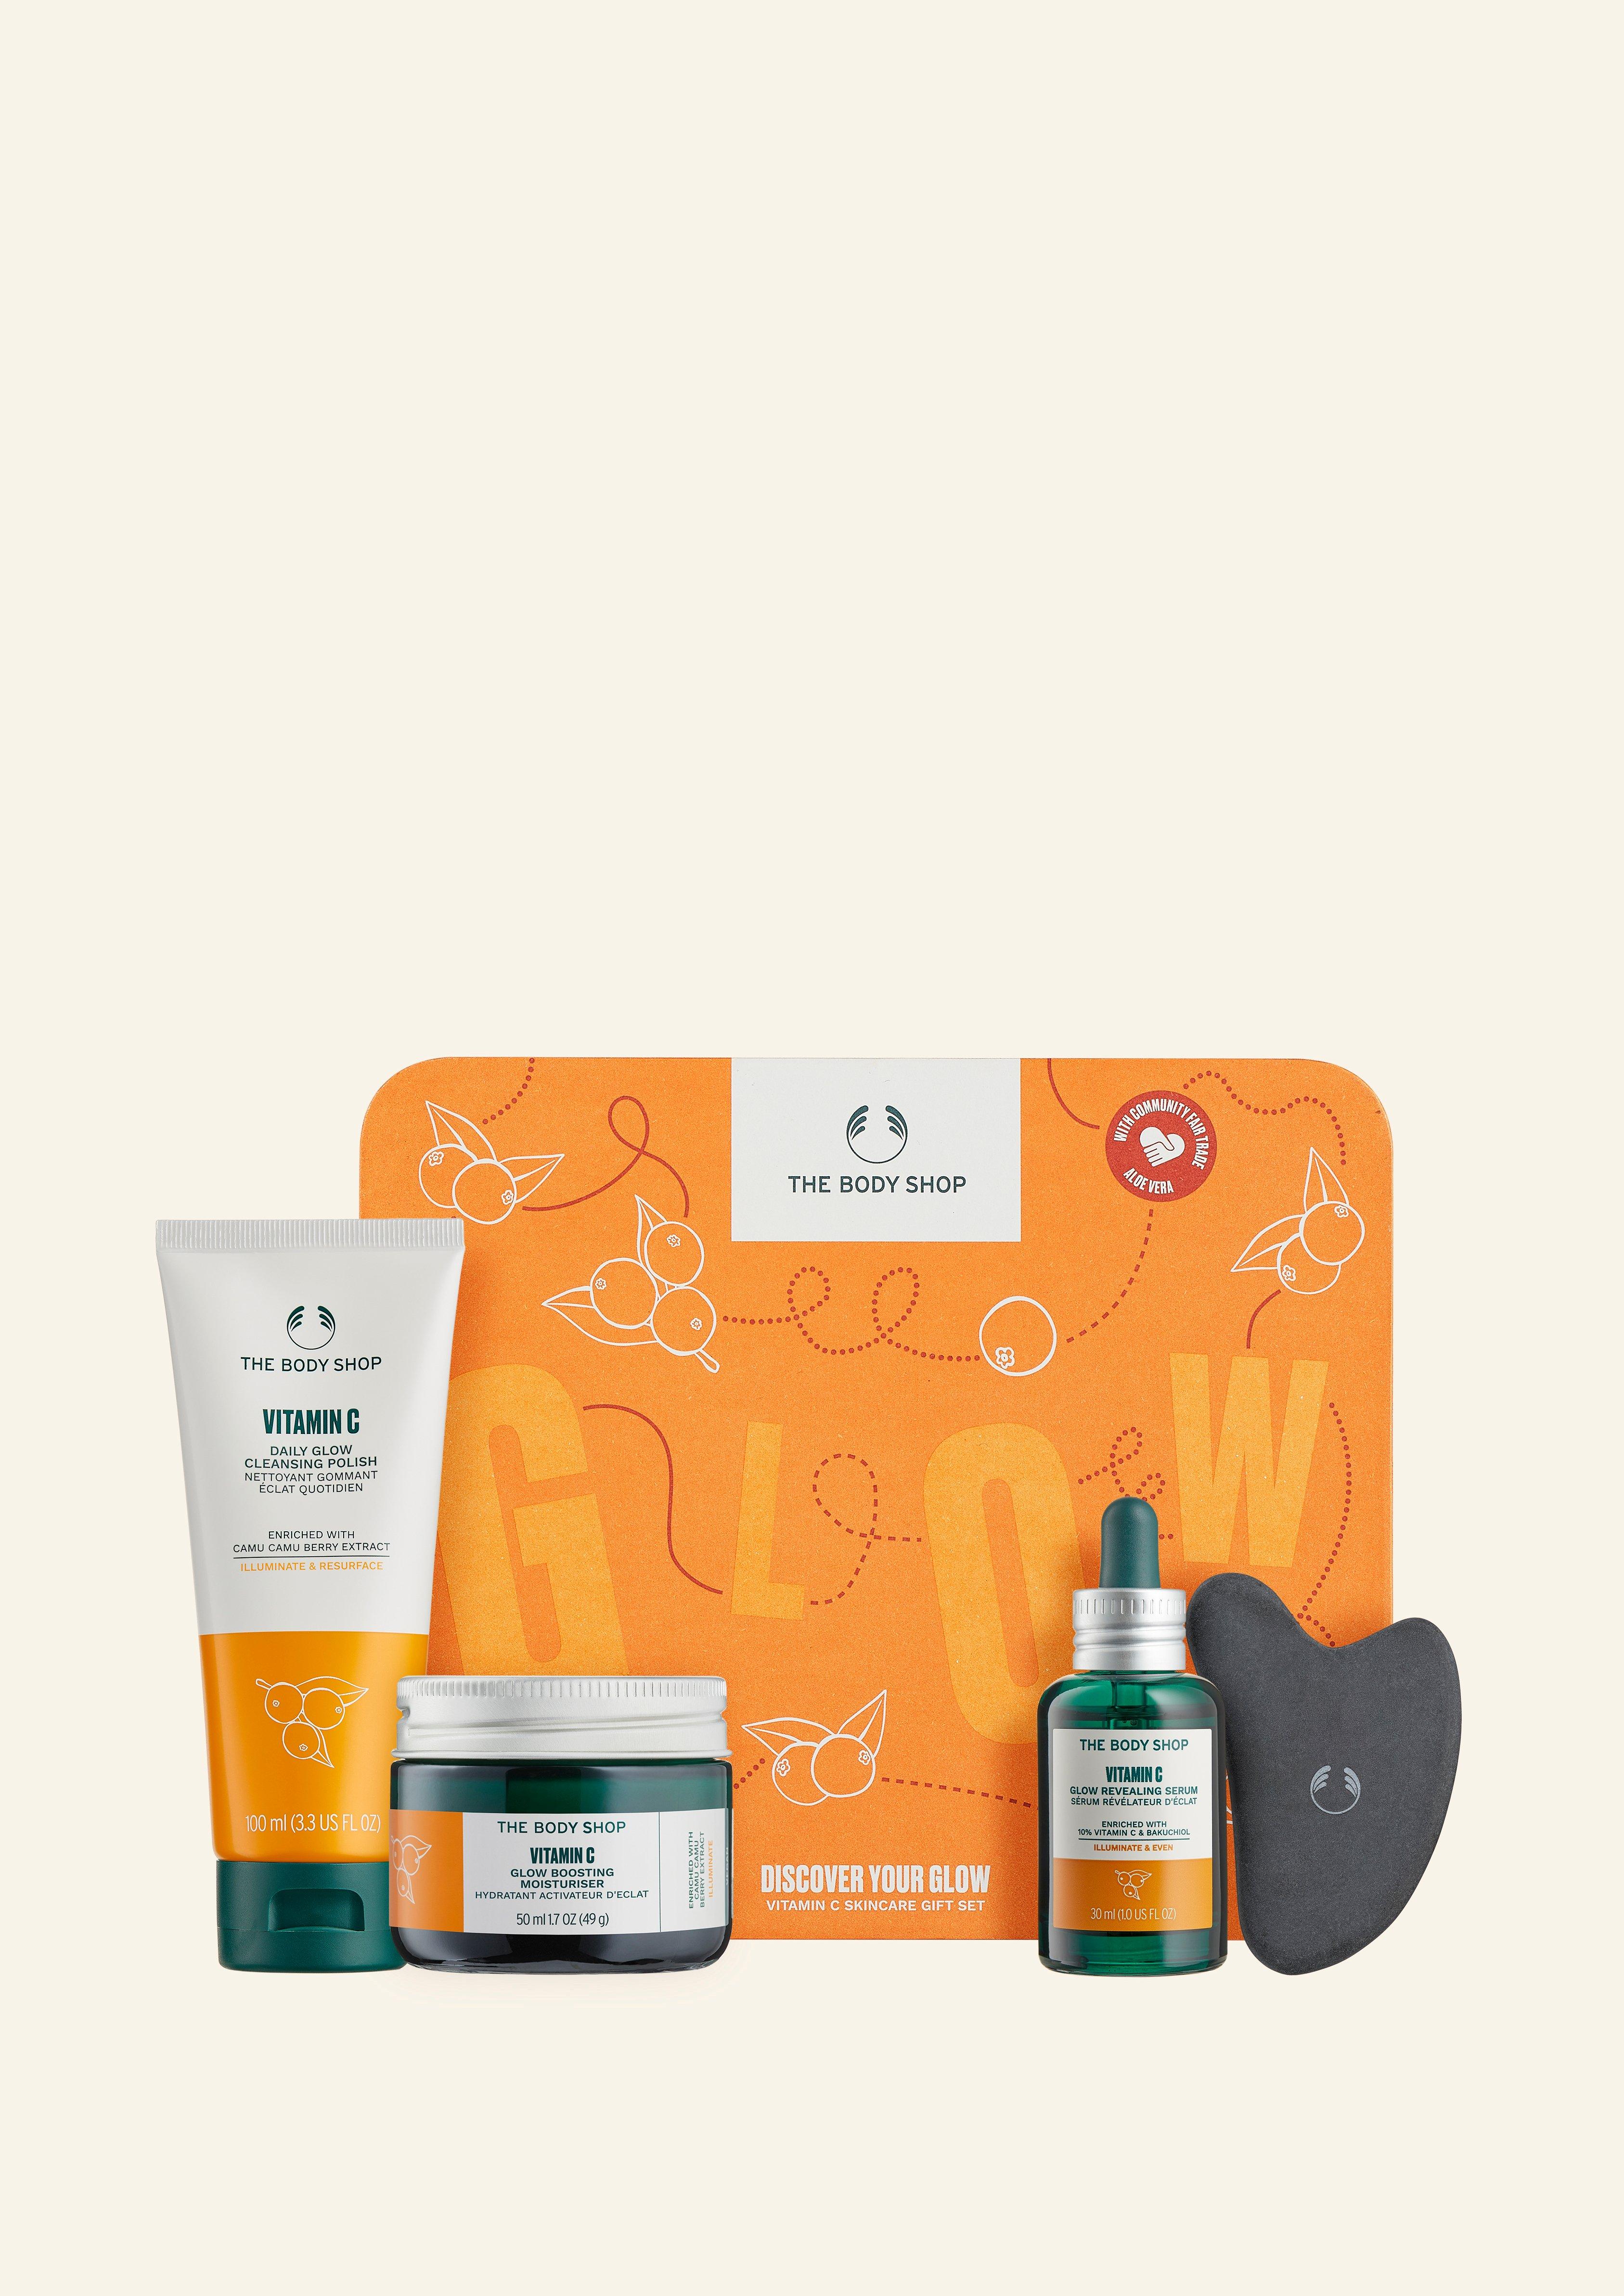 Discover Your Glow Vitamin C Skincare Gift Set